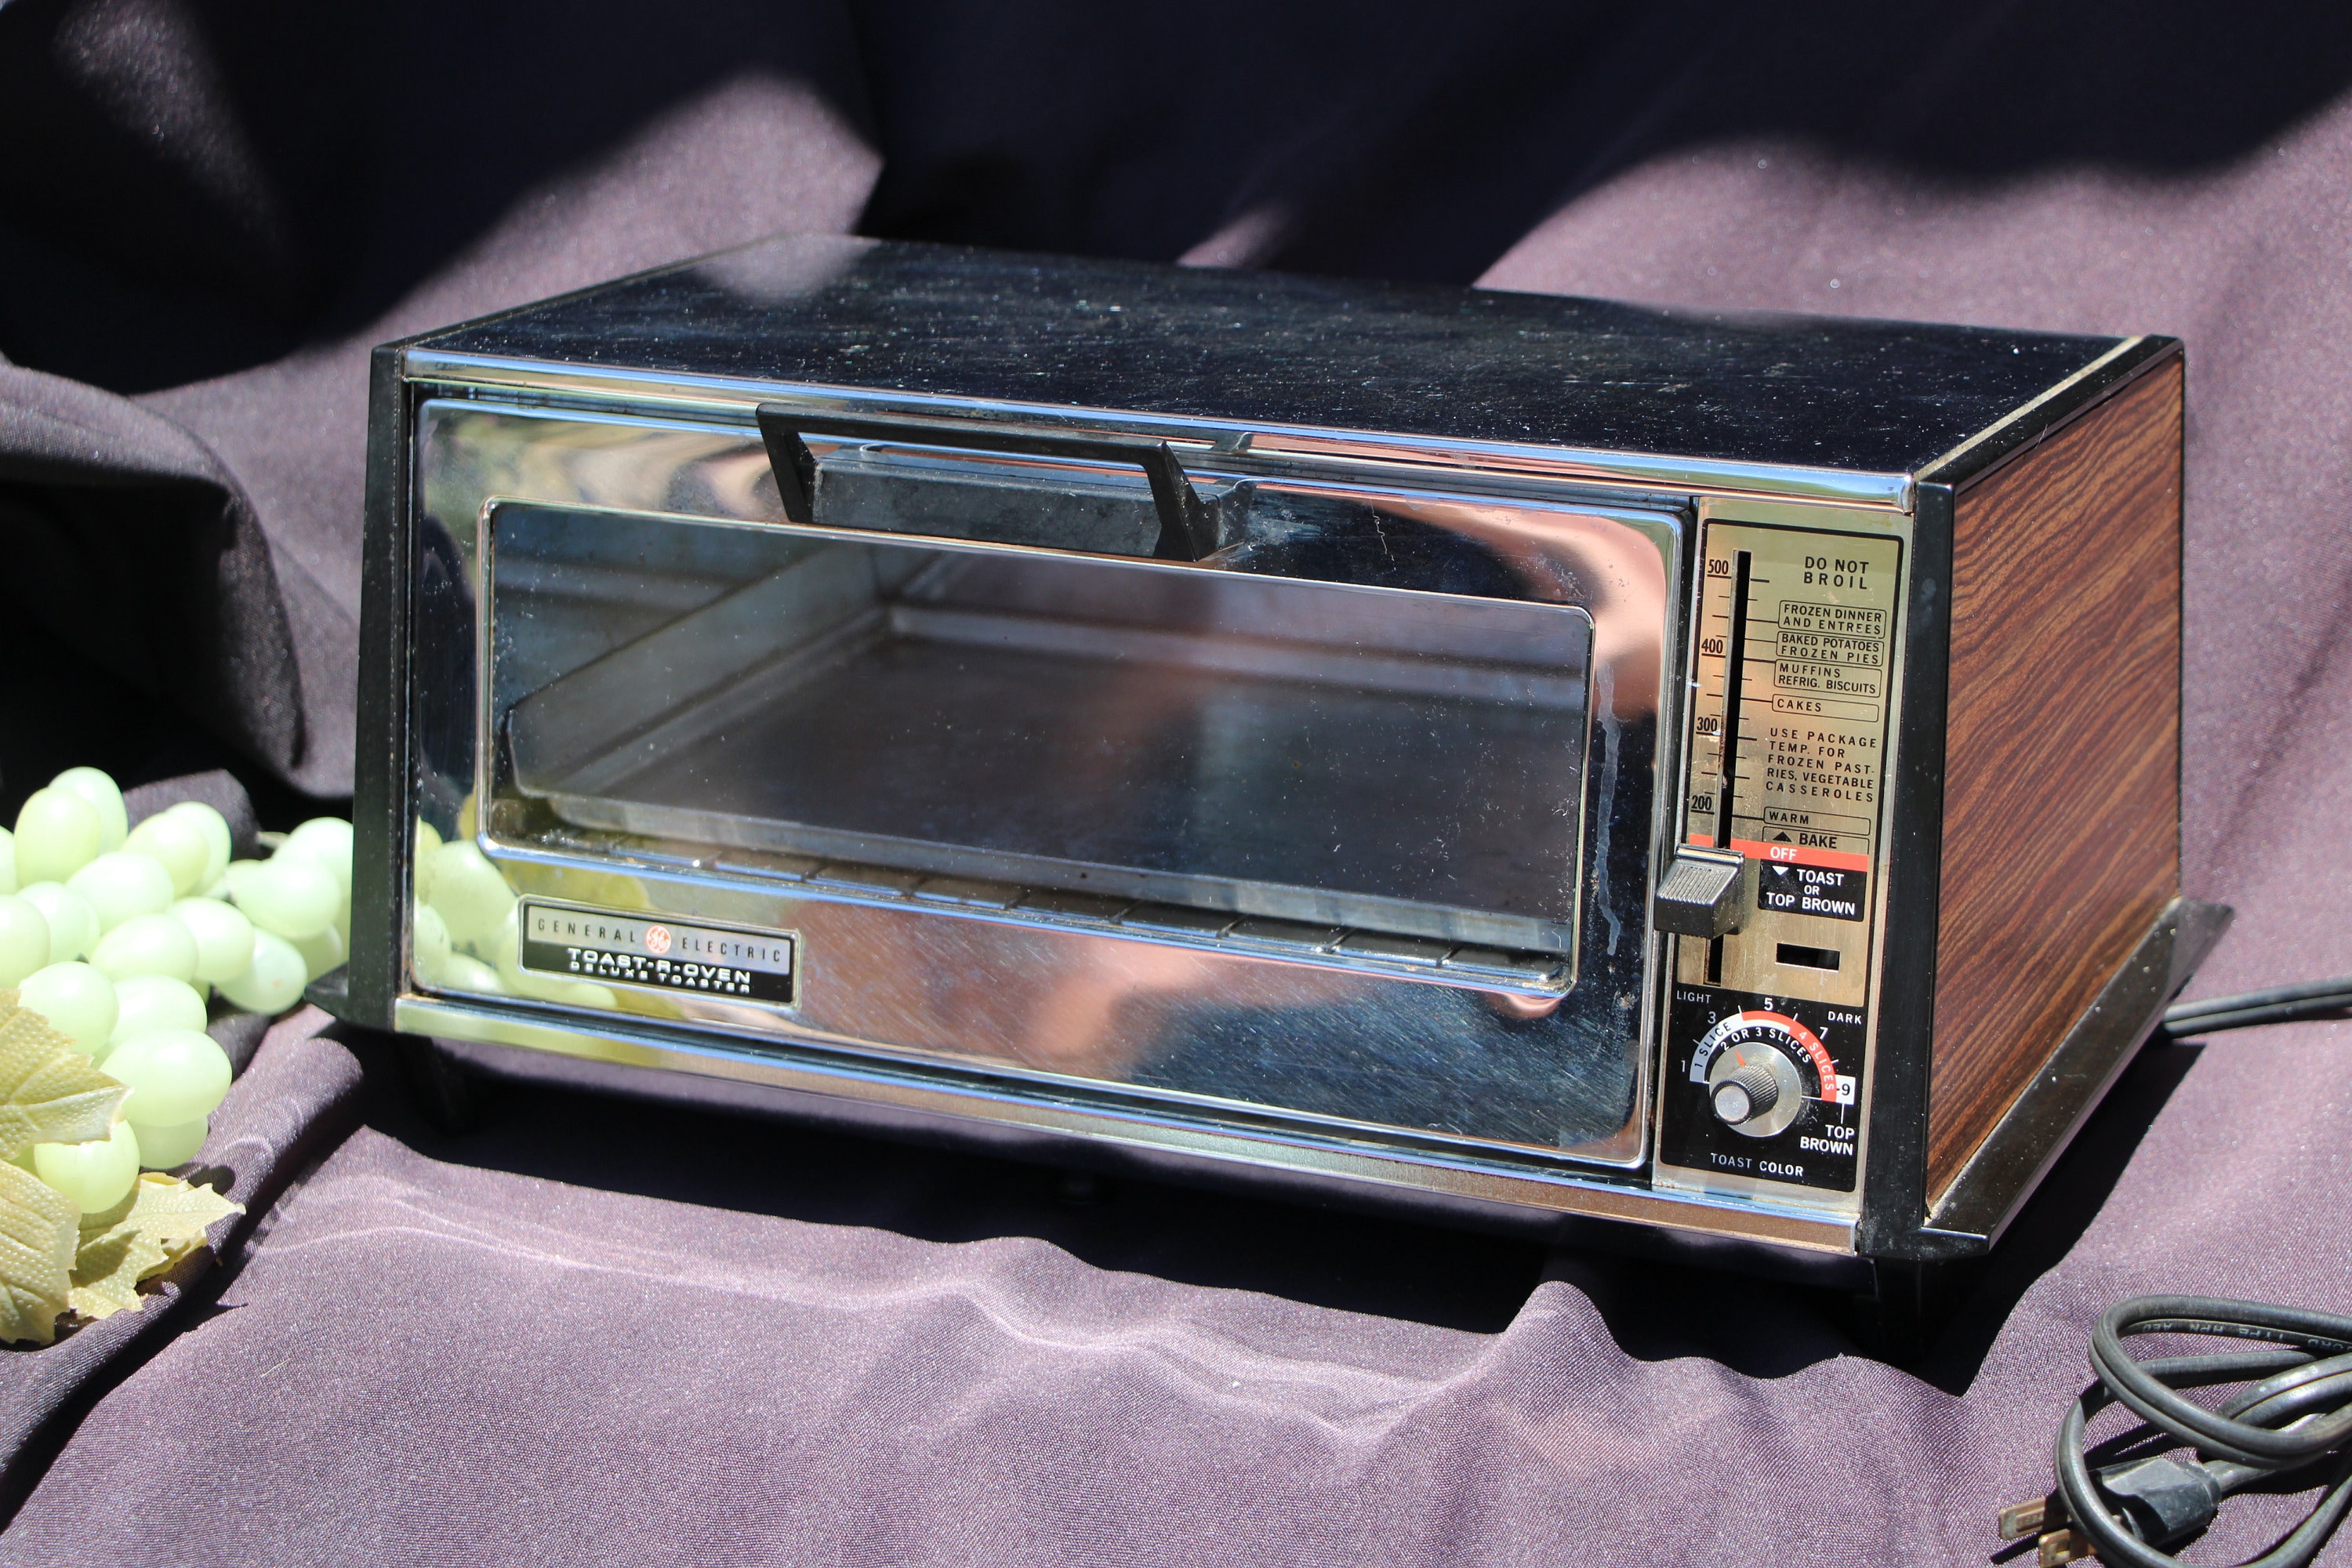 1976 Vintage - General Electric - Deluxe Toaster Oven with Broiler  TOAST  N BROIL  - Chrome - Retro - Works - Very Good Condition